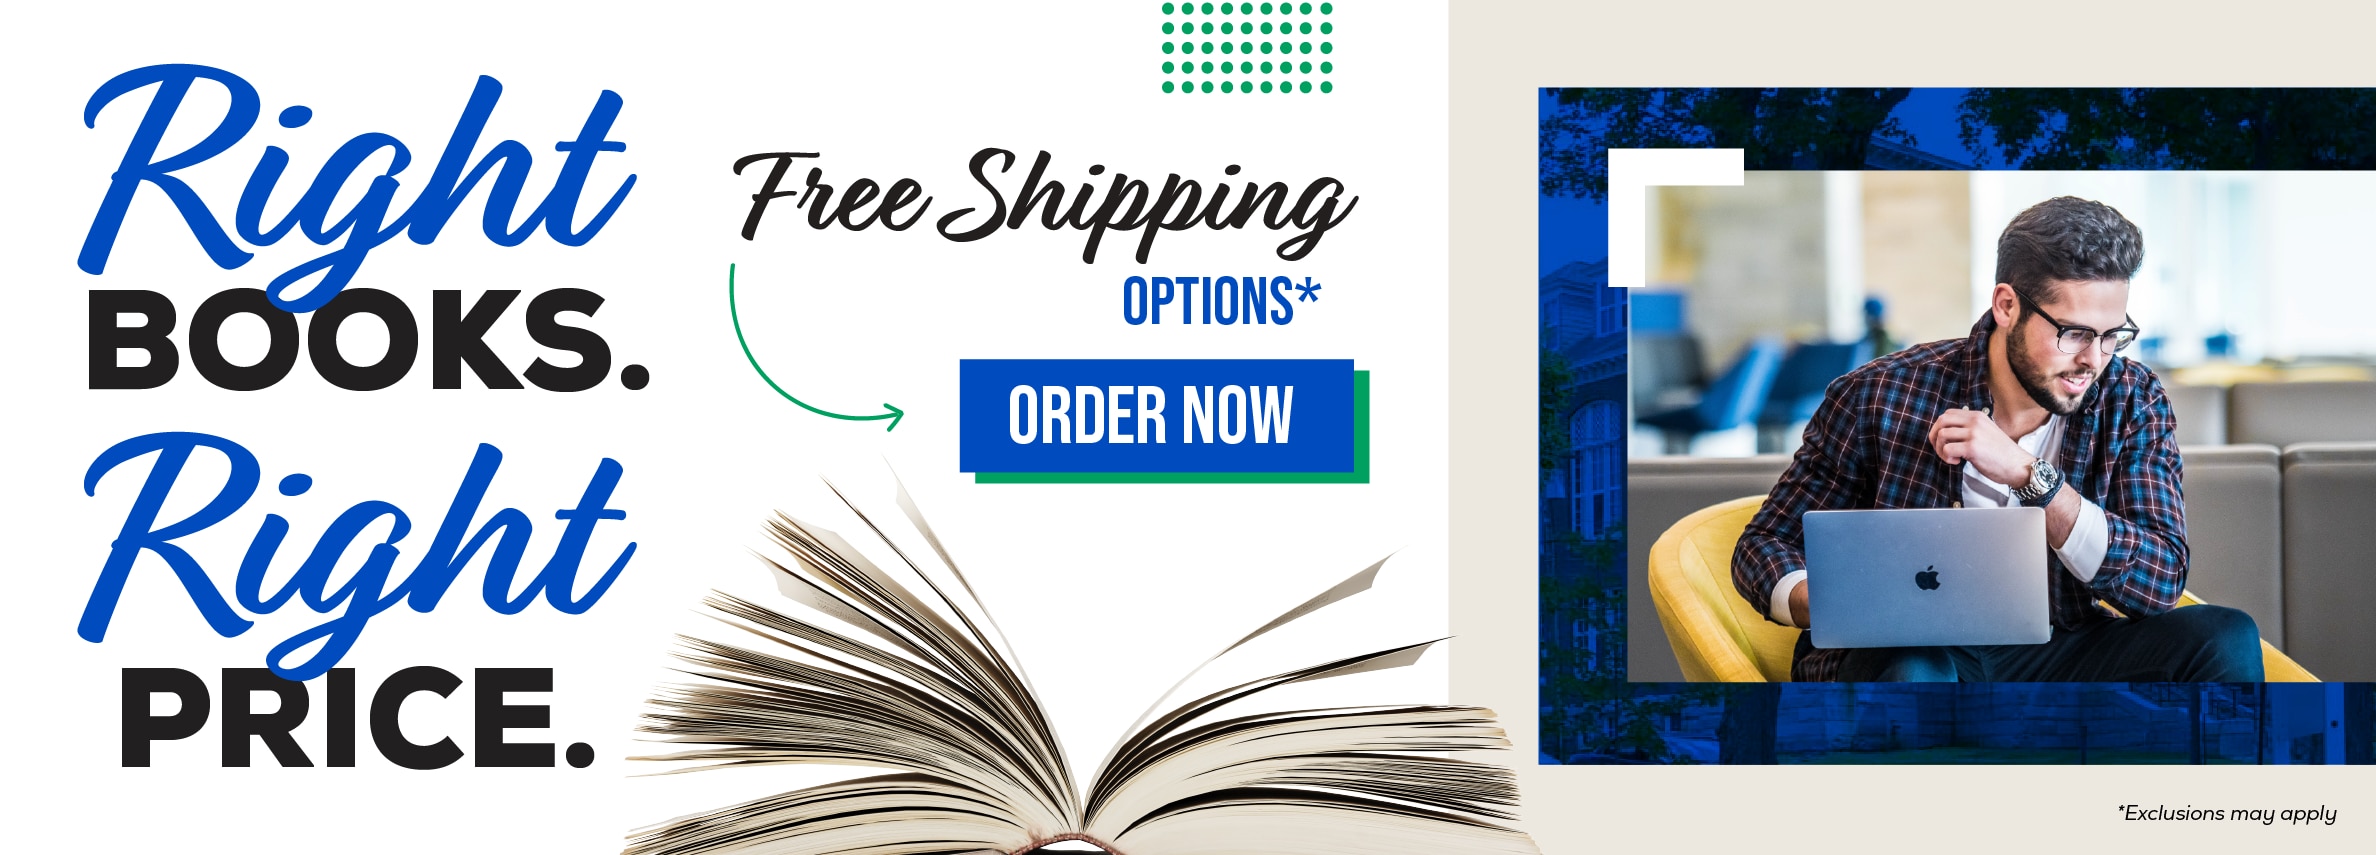 Right books. Right price. Free shipping options.* Order now. *Exclusions may apply.